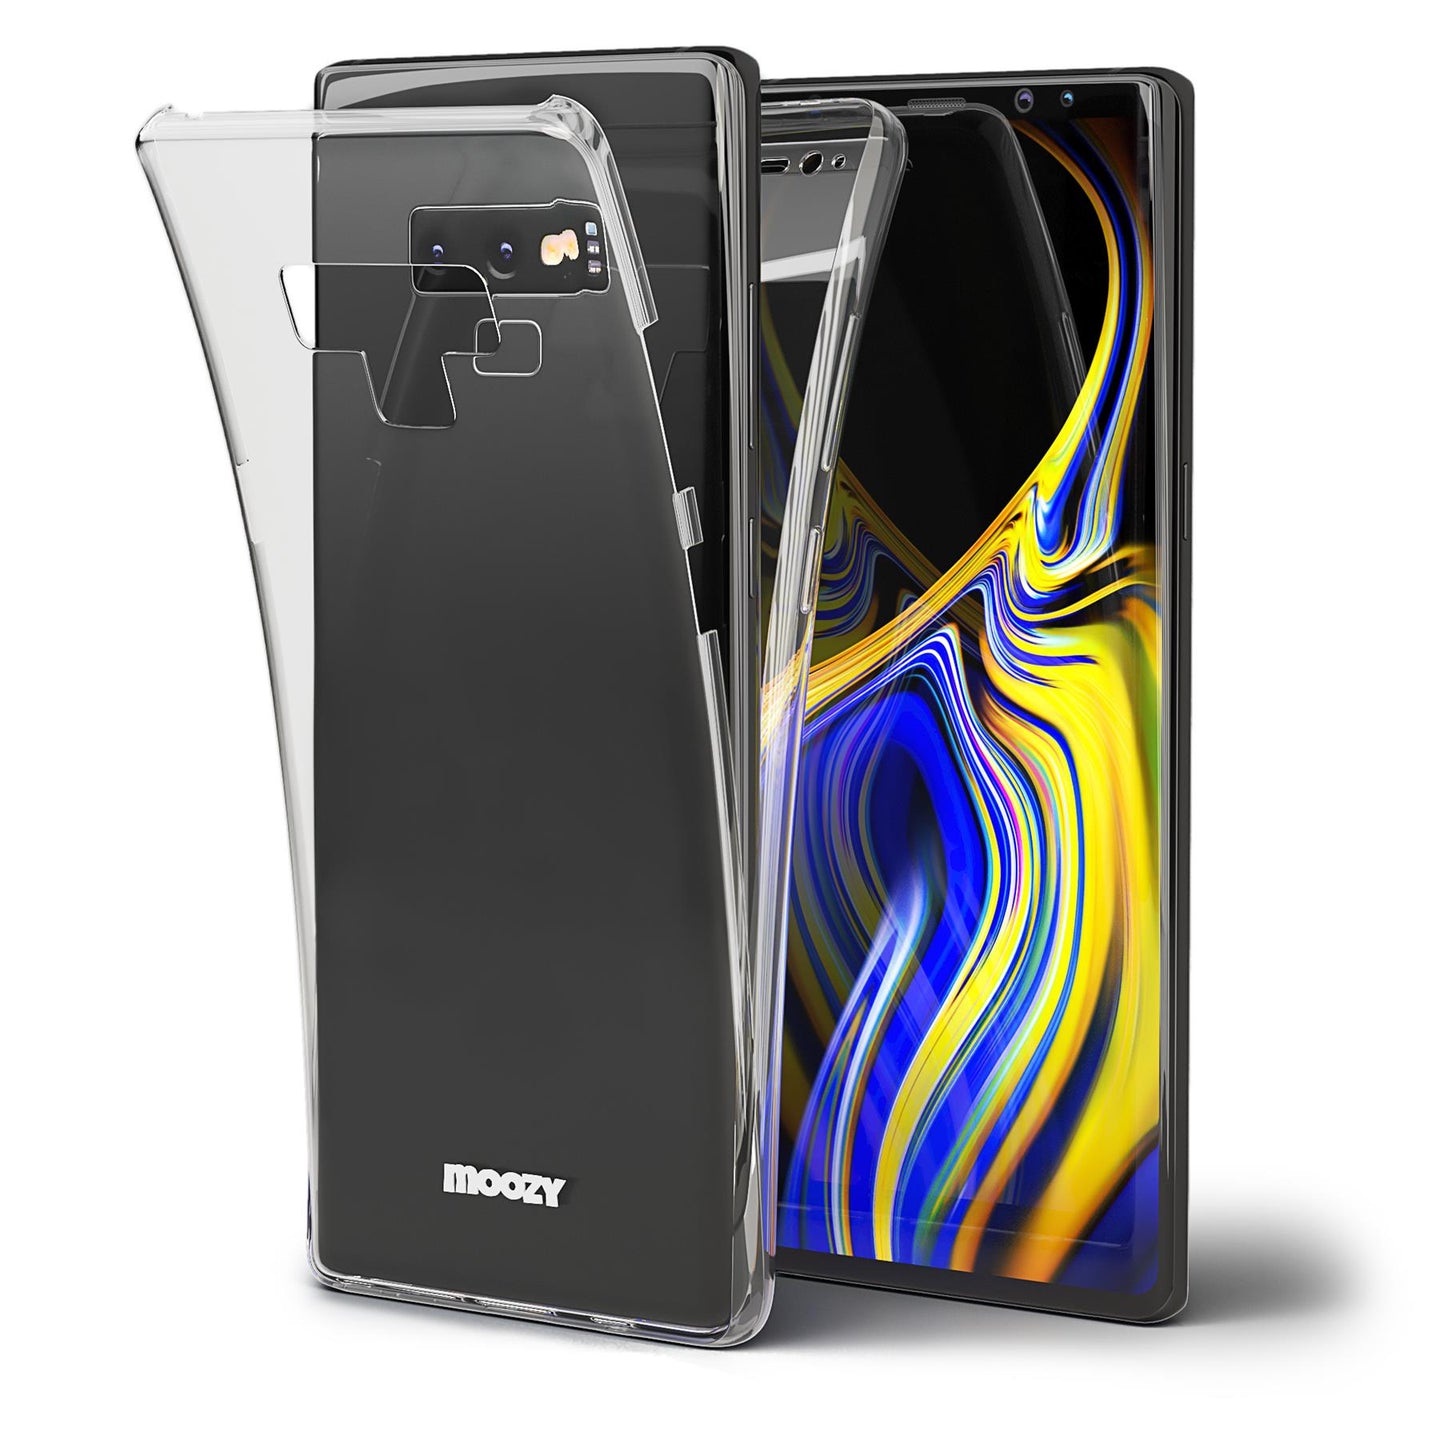 Moozy 360 Degree Case for Samsung Note 9 - Full body Front and Back Slim Clear Transparent TPU Silicone Gel Cover